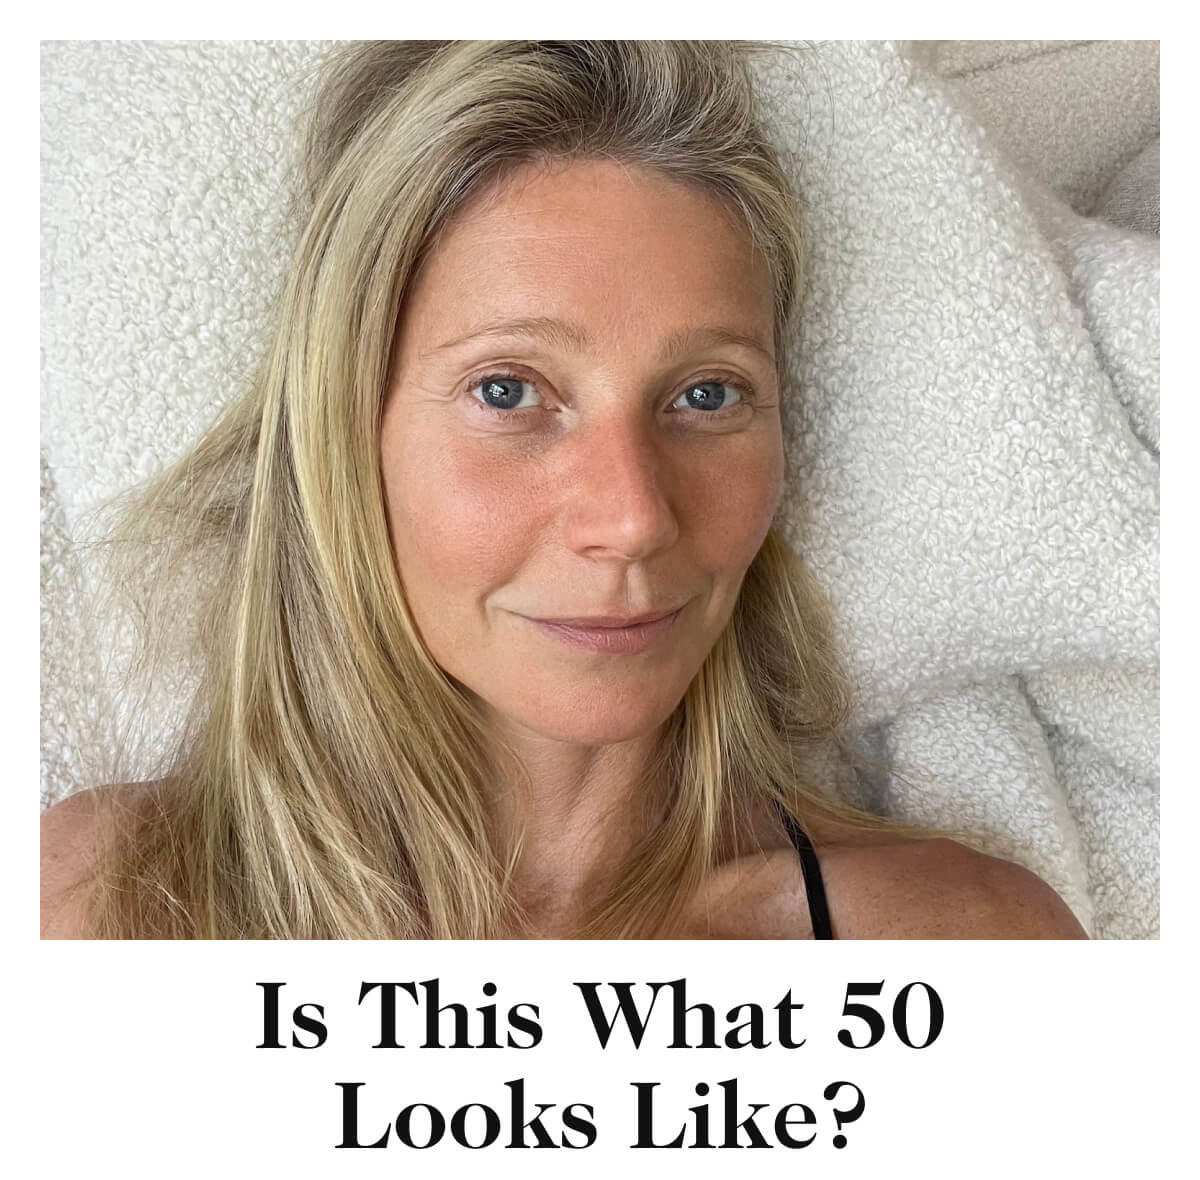 Is This What 50 Looks Like?